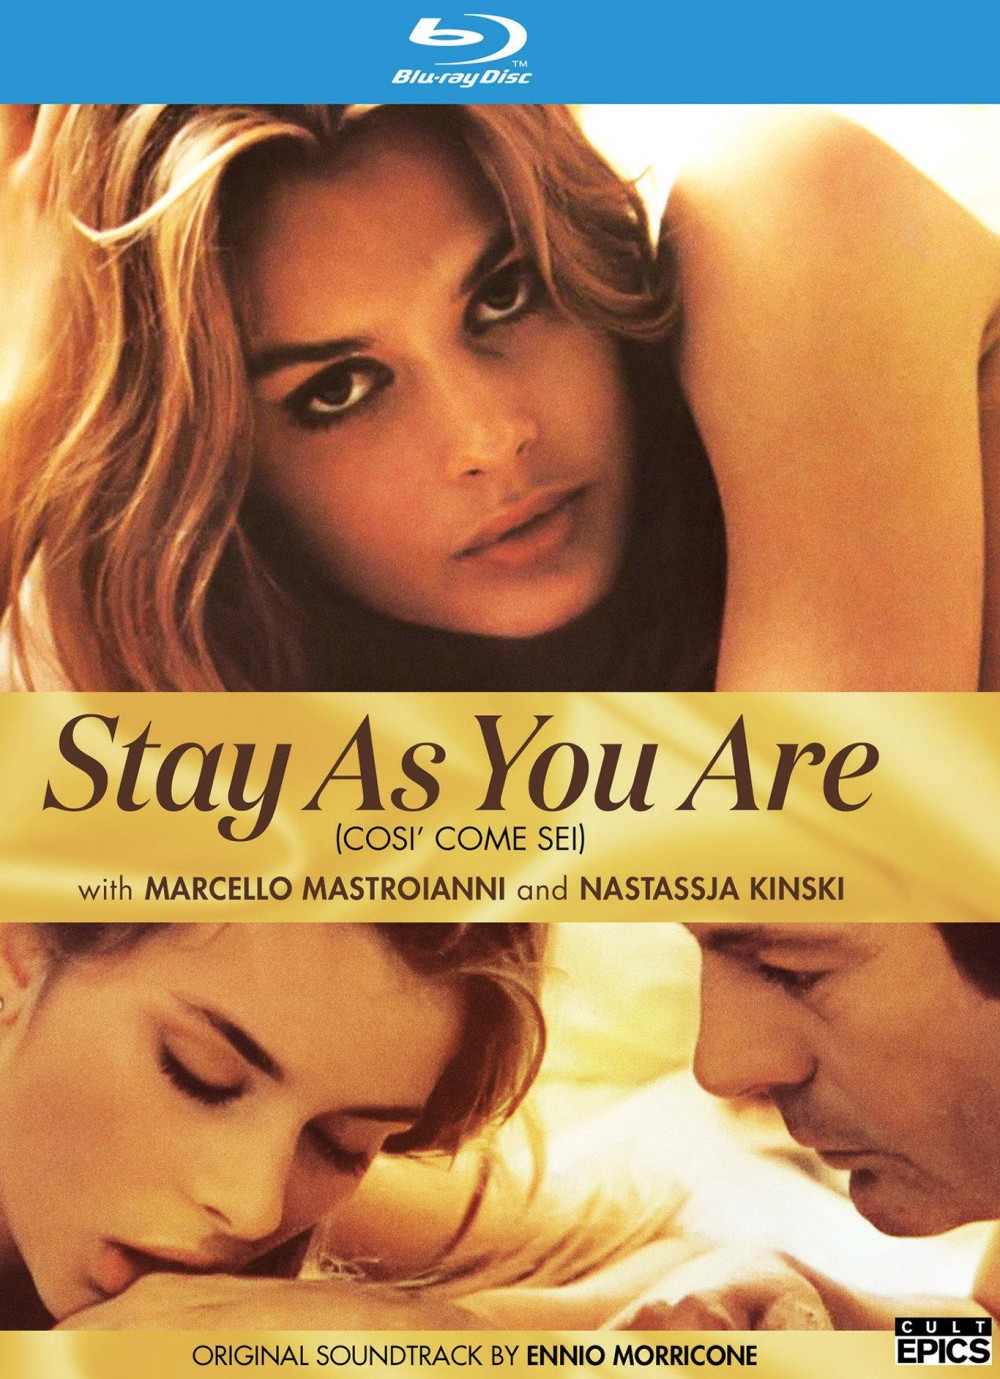 stay-as-you-are-(1978)-large-cover.jpg